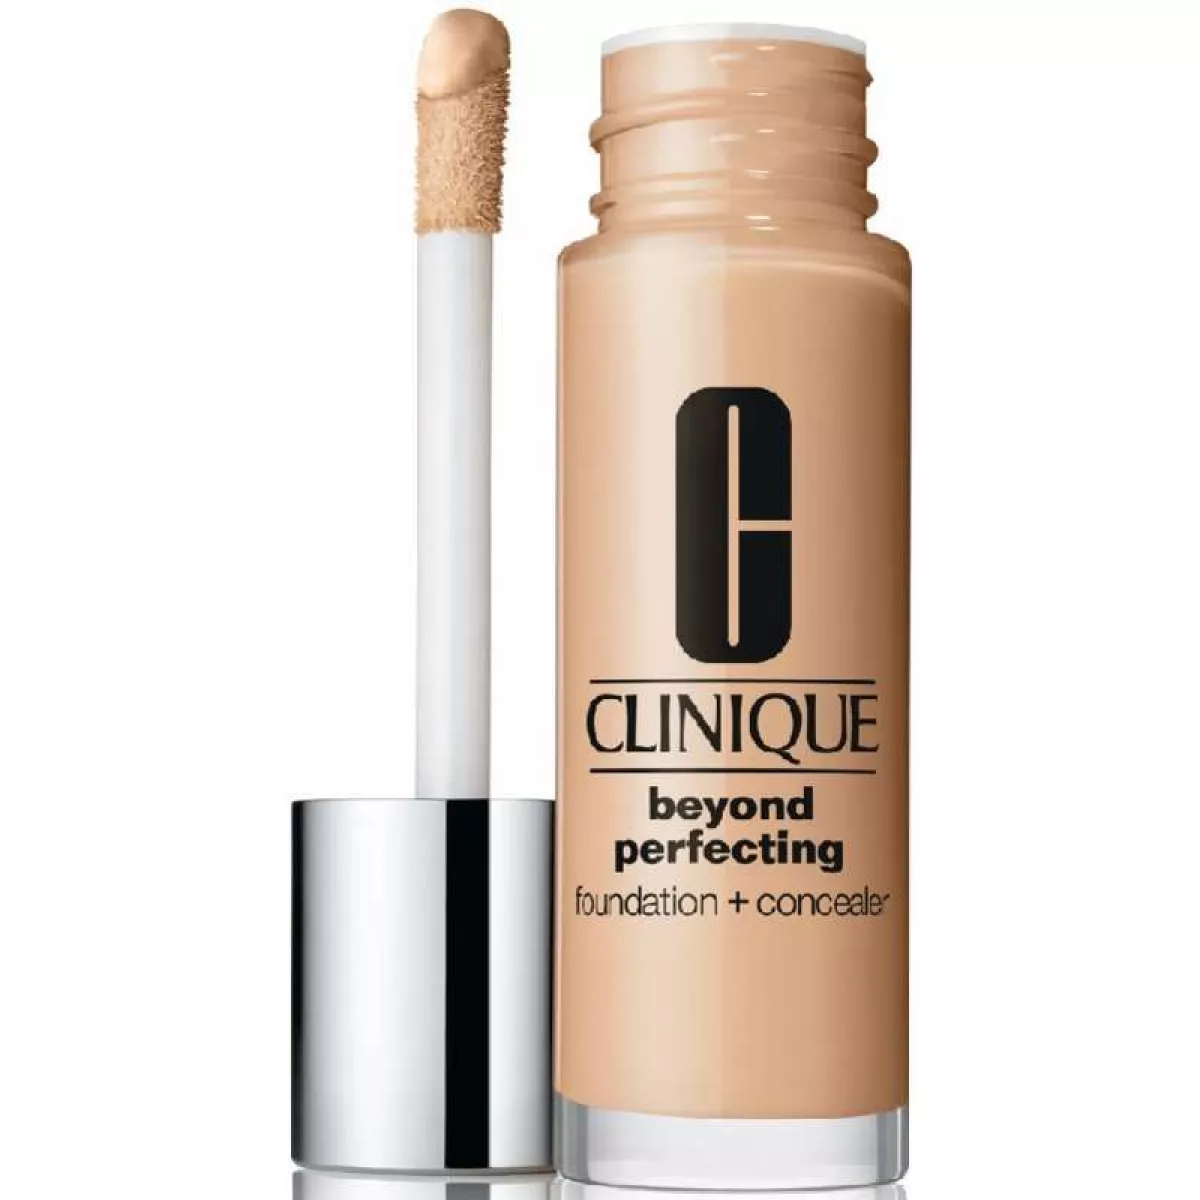 #1 - Clinique Beyond Perfecting Foundation + Concealer 30 ml - Ivory